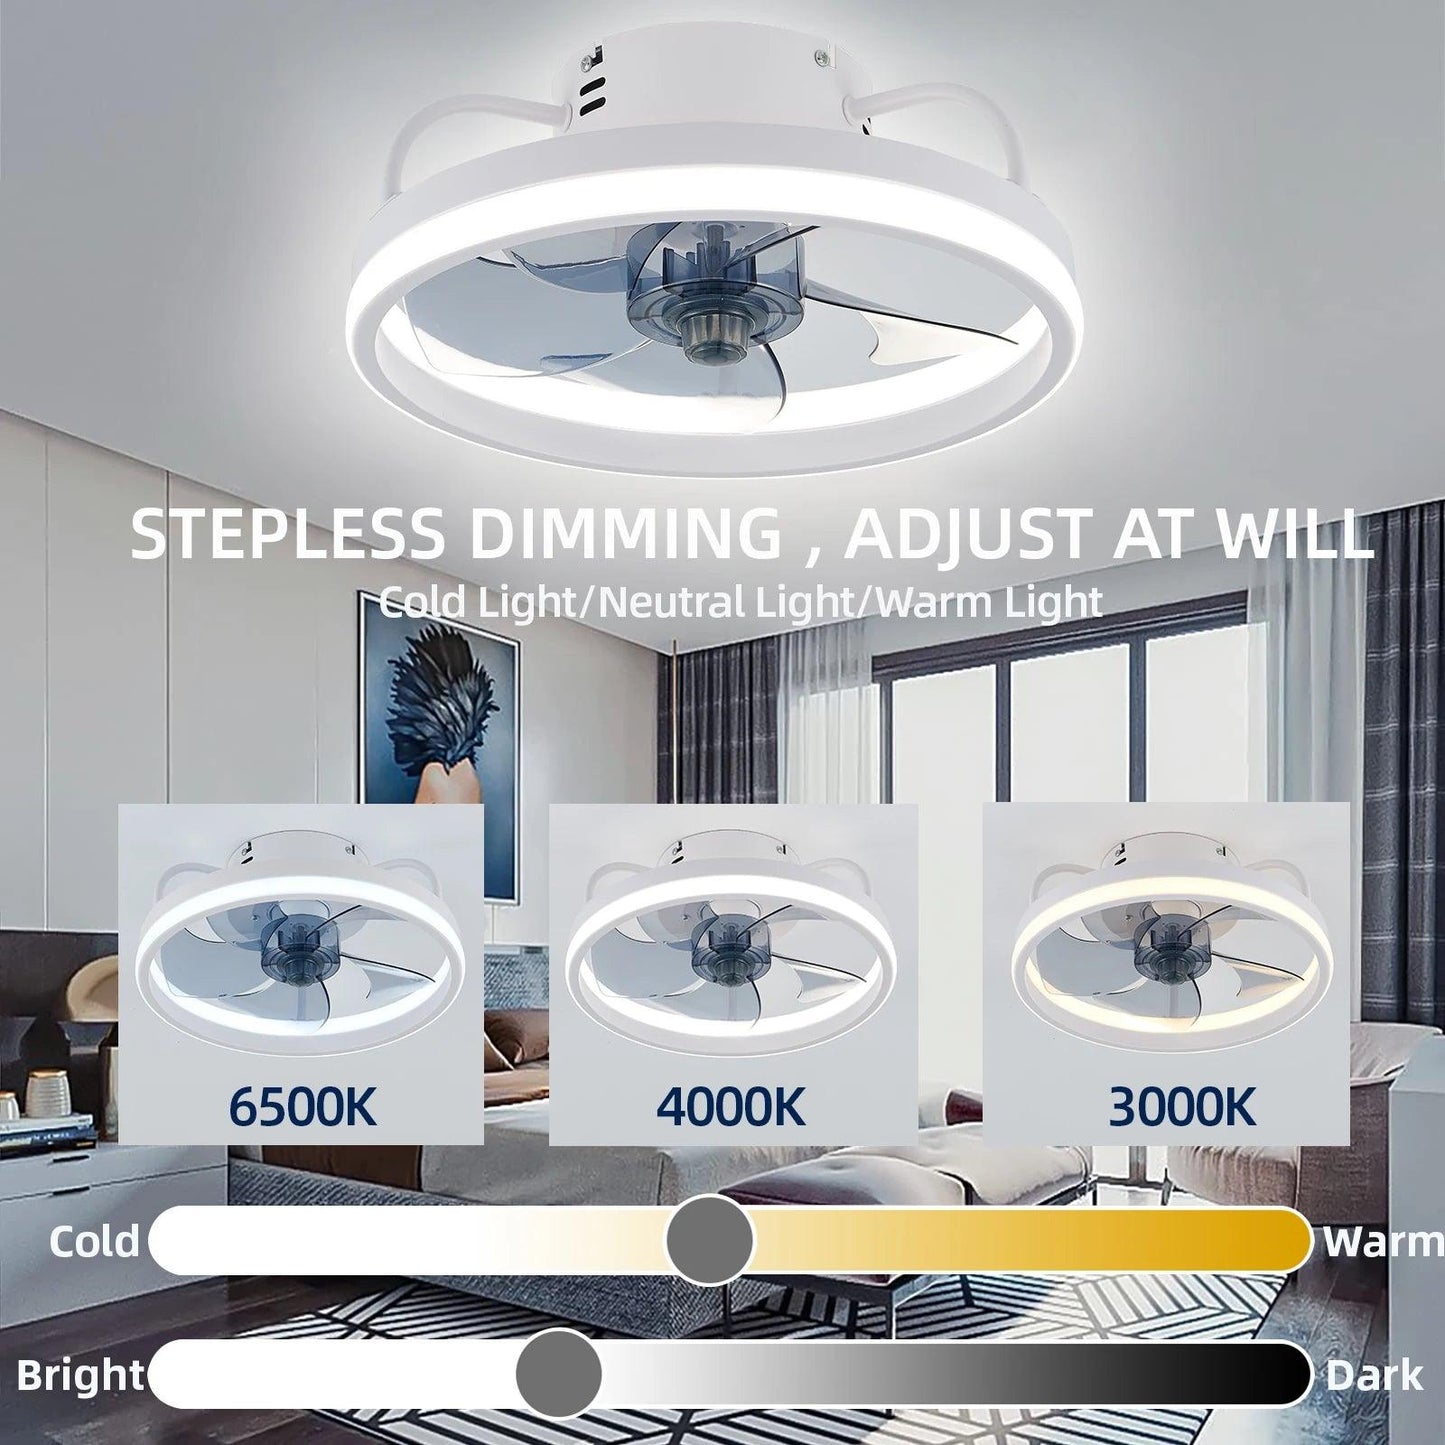 Smart Ceiling Fan With Lights Remote Control Bedroom Decor Invisible Blades Silent - Whole Home Warehouse 